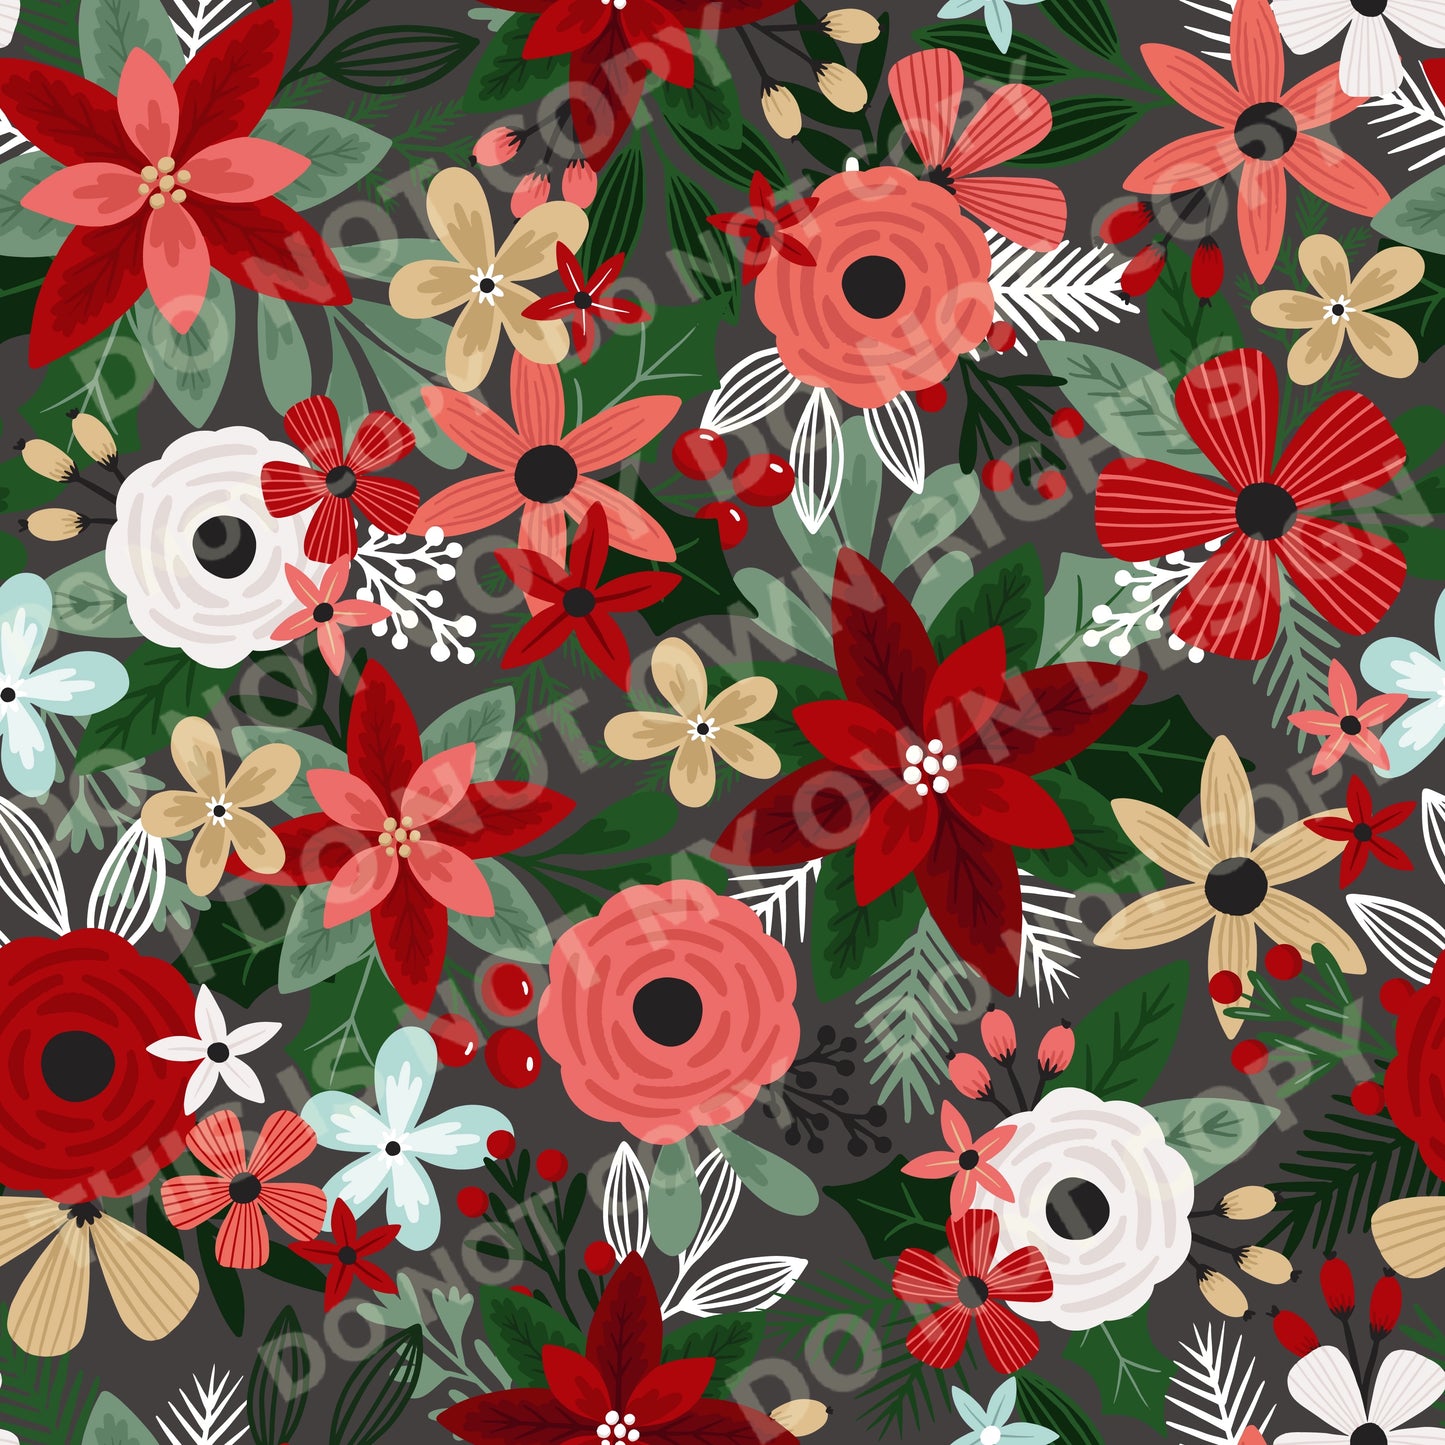 Merry Christmas Floral Printed Fabric Bullet/DBP/Leather